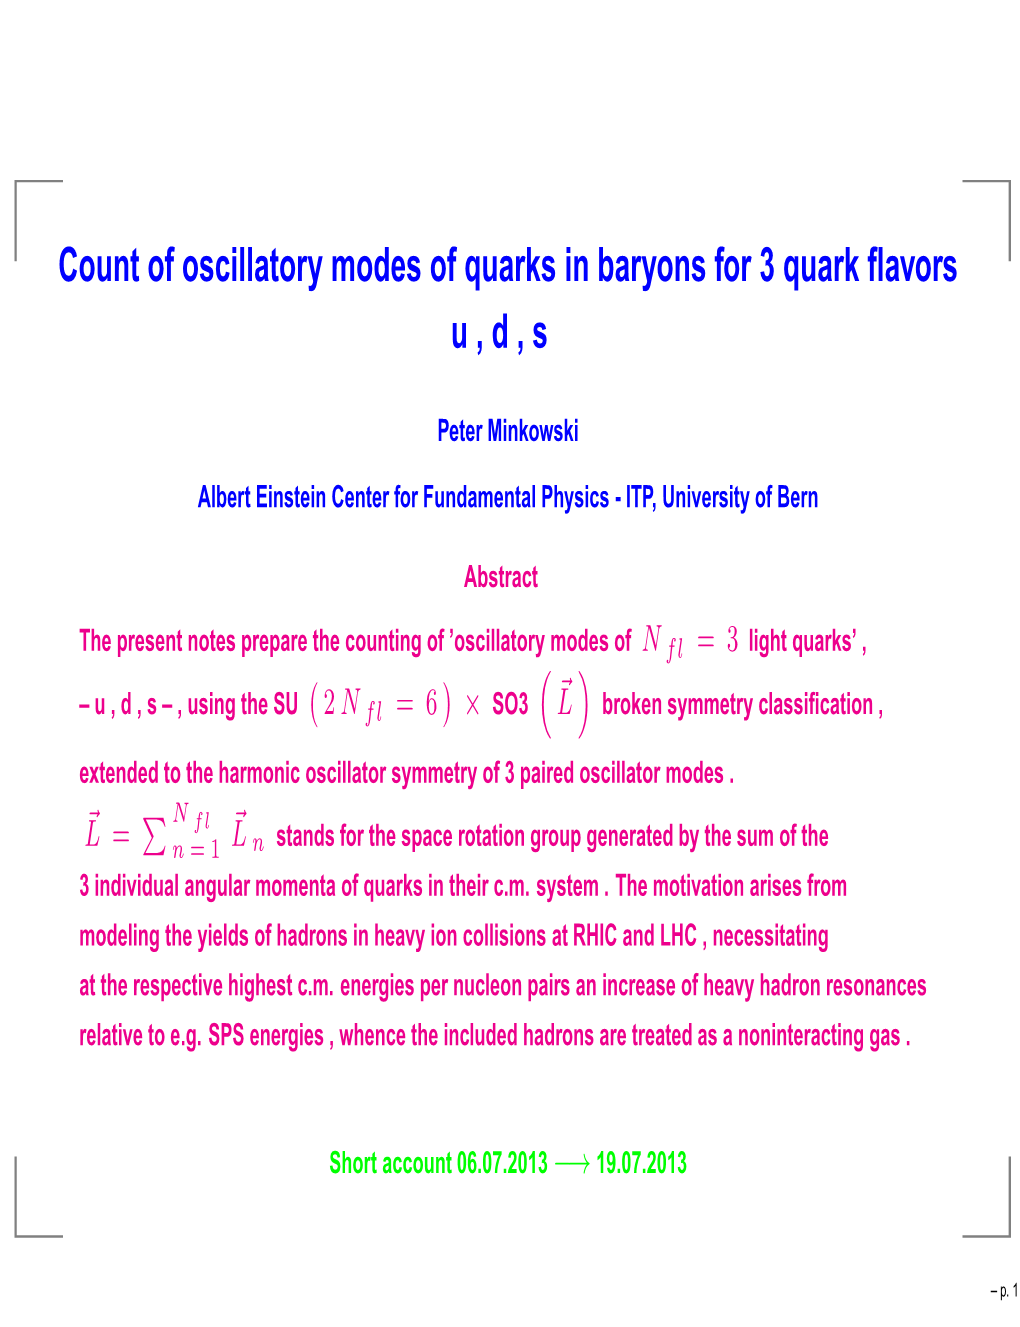 Count of Oscillatory Modes of Quarks in Baryons for 3 Quark Flavors U